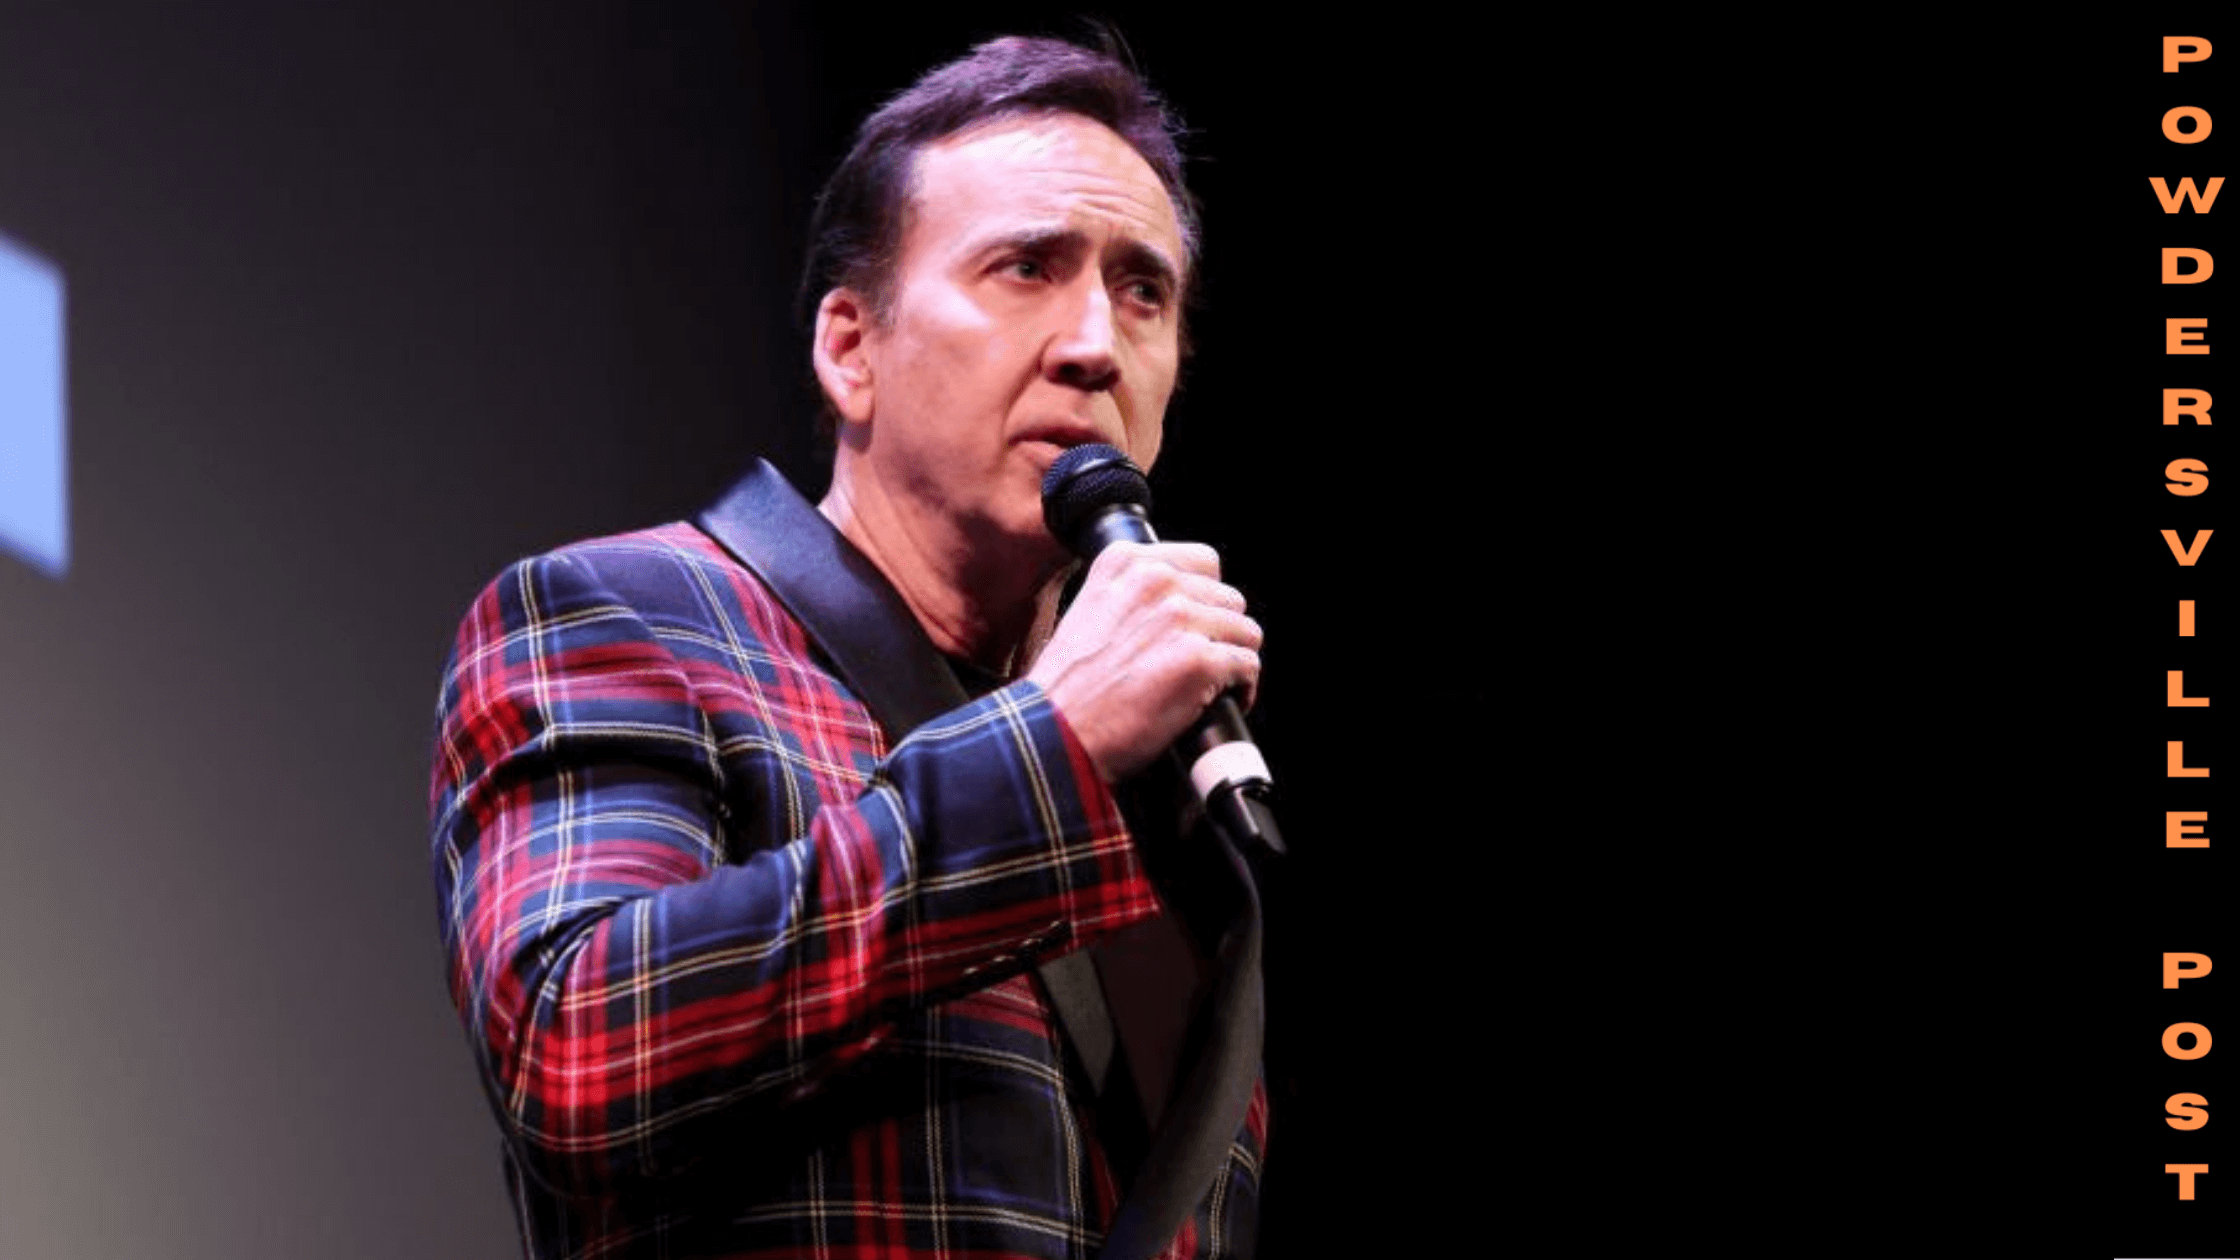 Nicolas Cage Net Worth In 2022 Who Is Nicolas Cage Age, Family, Salary